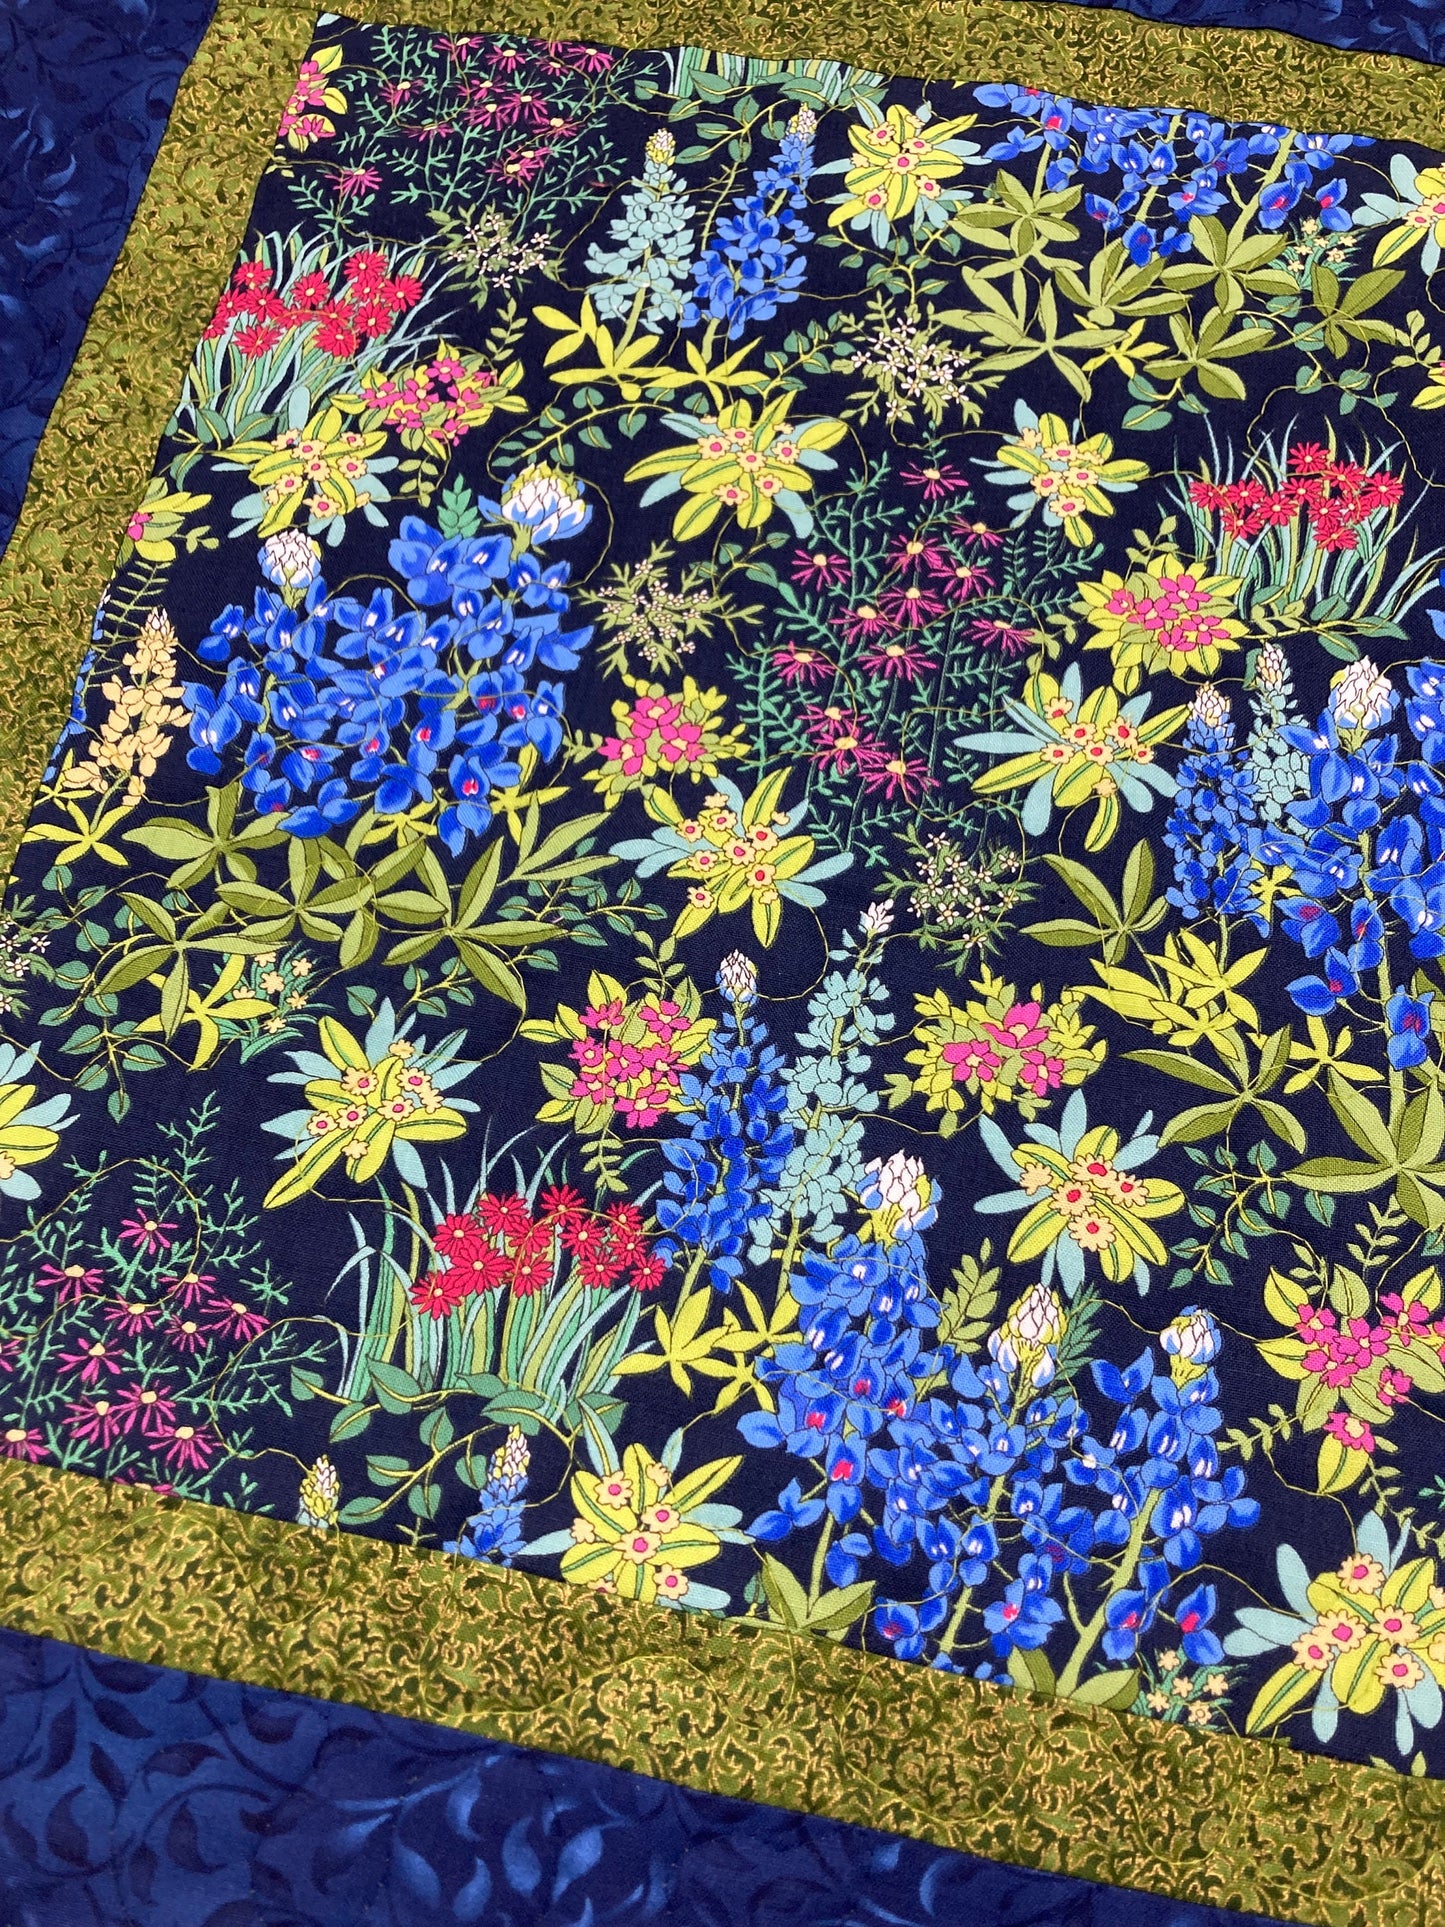 Garden Wildflower Quilted Table Topper, Large Square Coffee Table Reversible 20x20" Summer End Table, Garden Everyday Kitchen